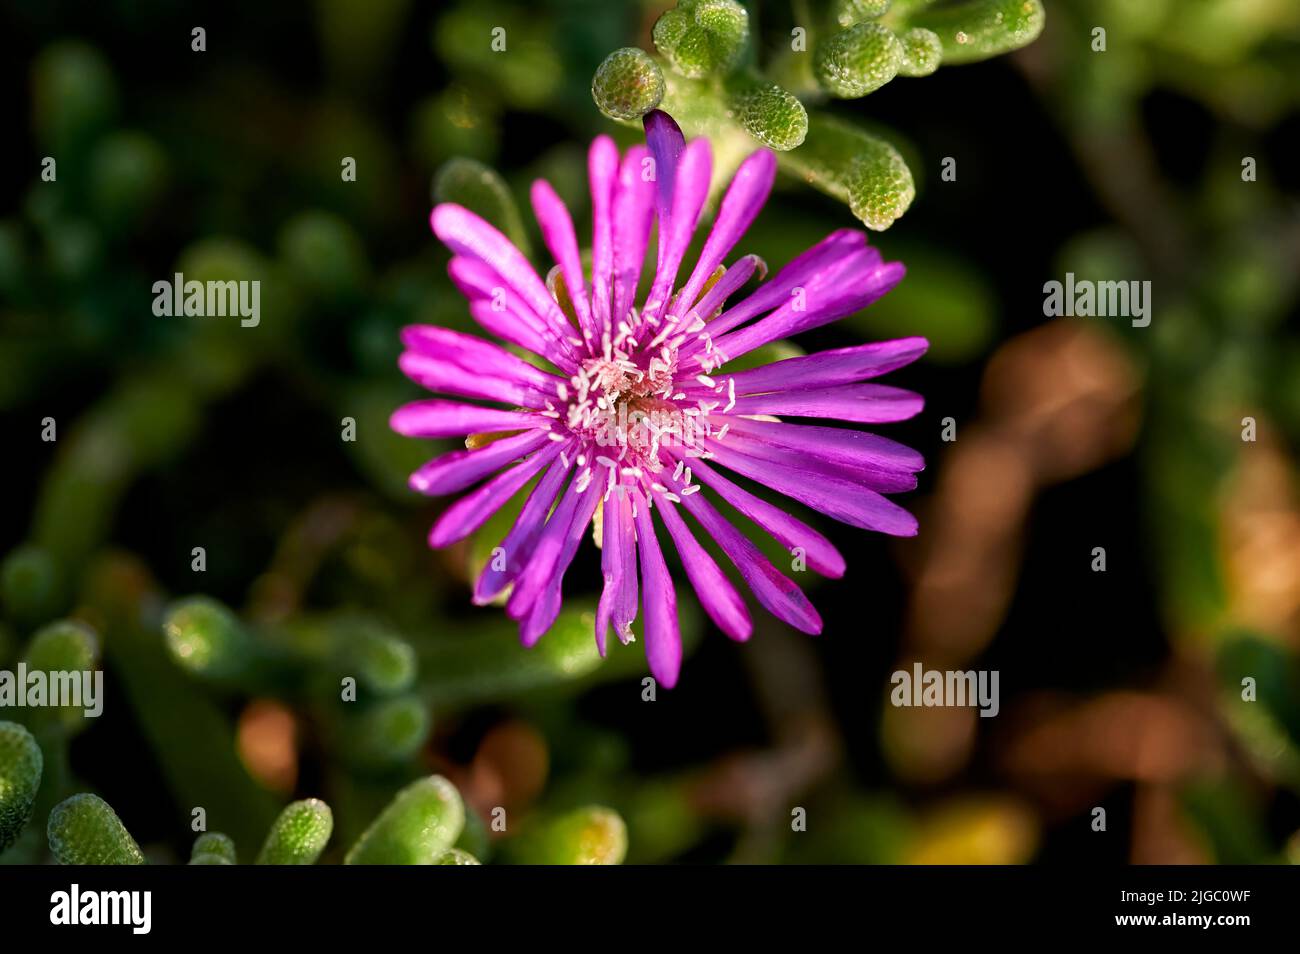 Close up of a Delosperma cooperi flower pink carpet or ice plant with petals of pink color and seeing in detail its stamens and pistils Stock Photo